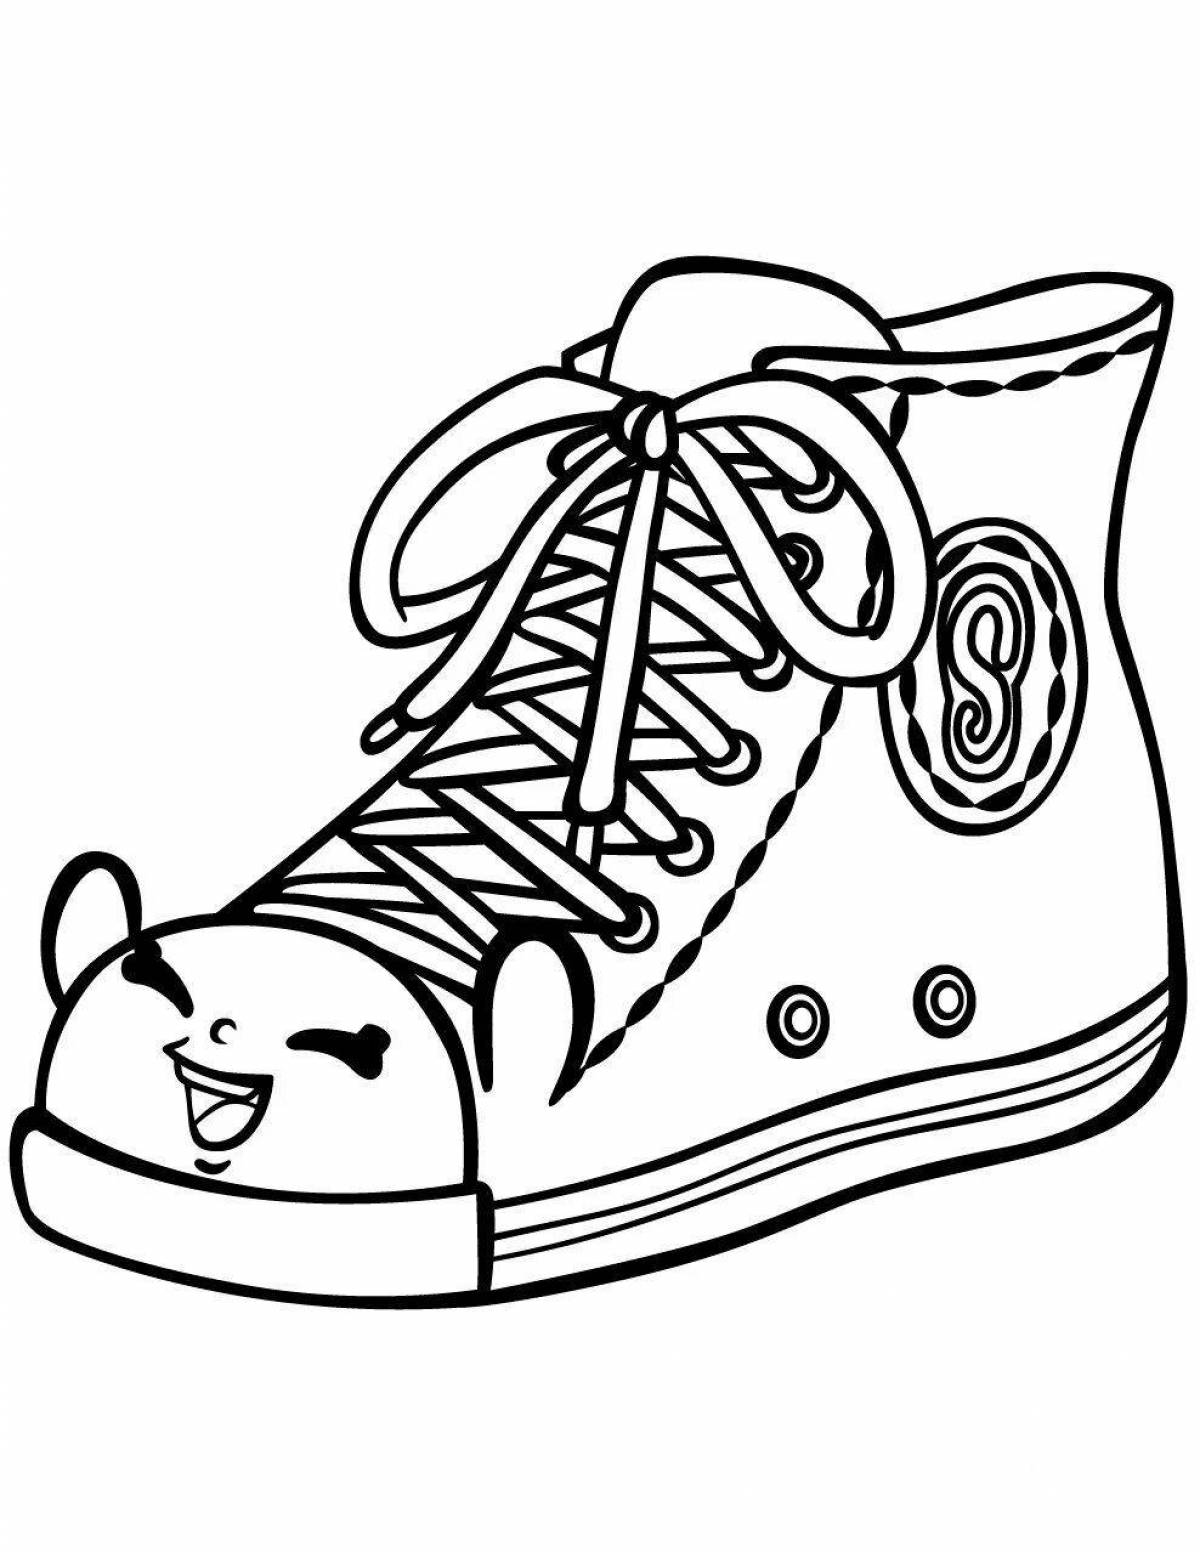 Cool boots coloring book for kids